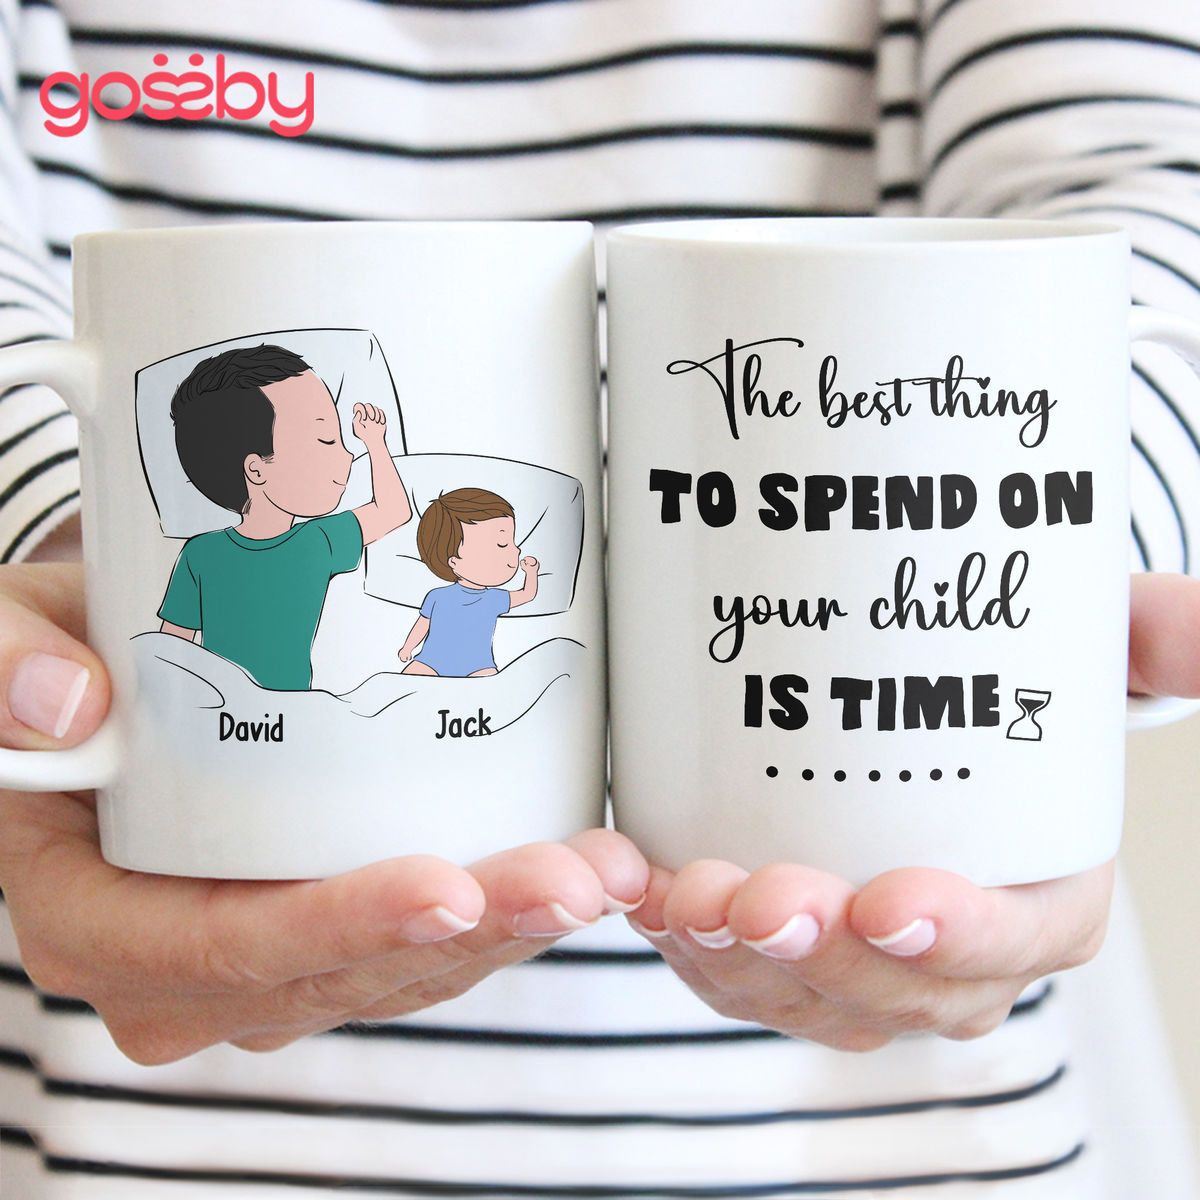 The best thing to spend on your child is time